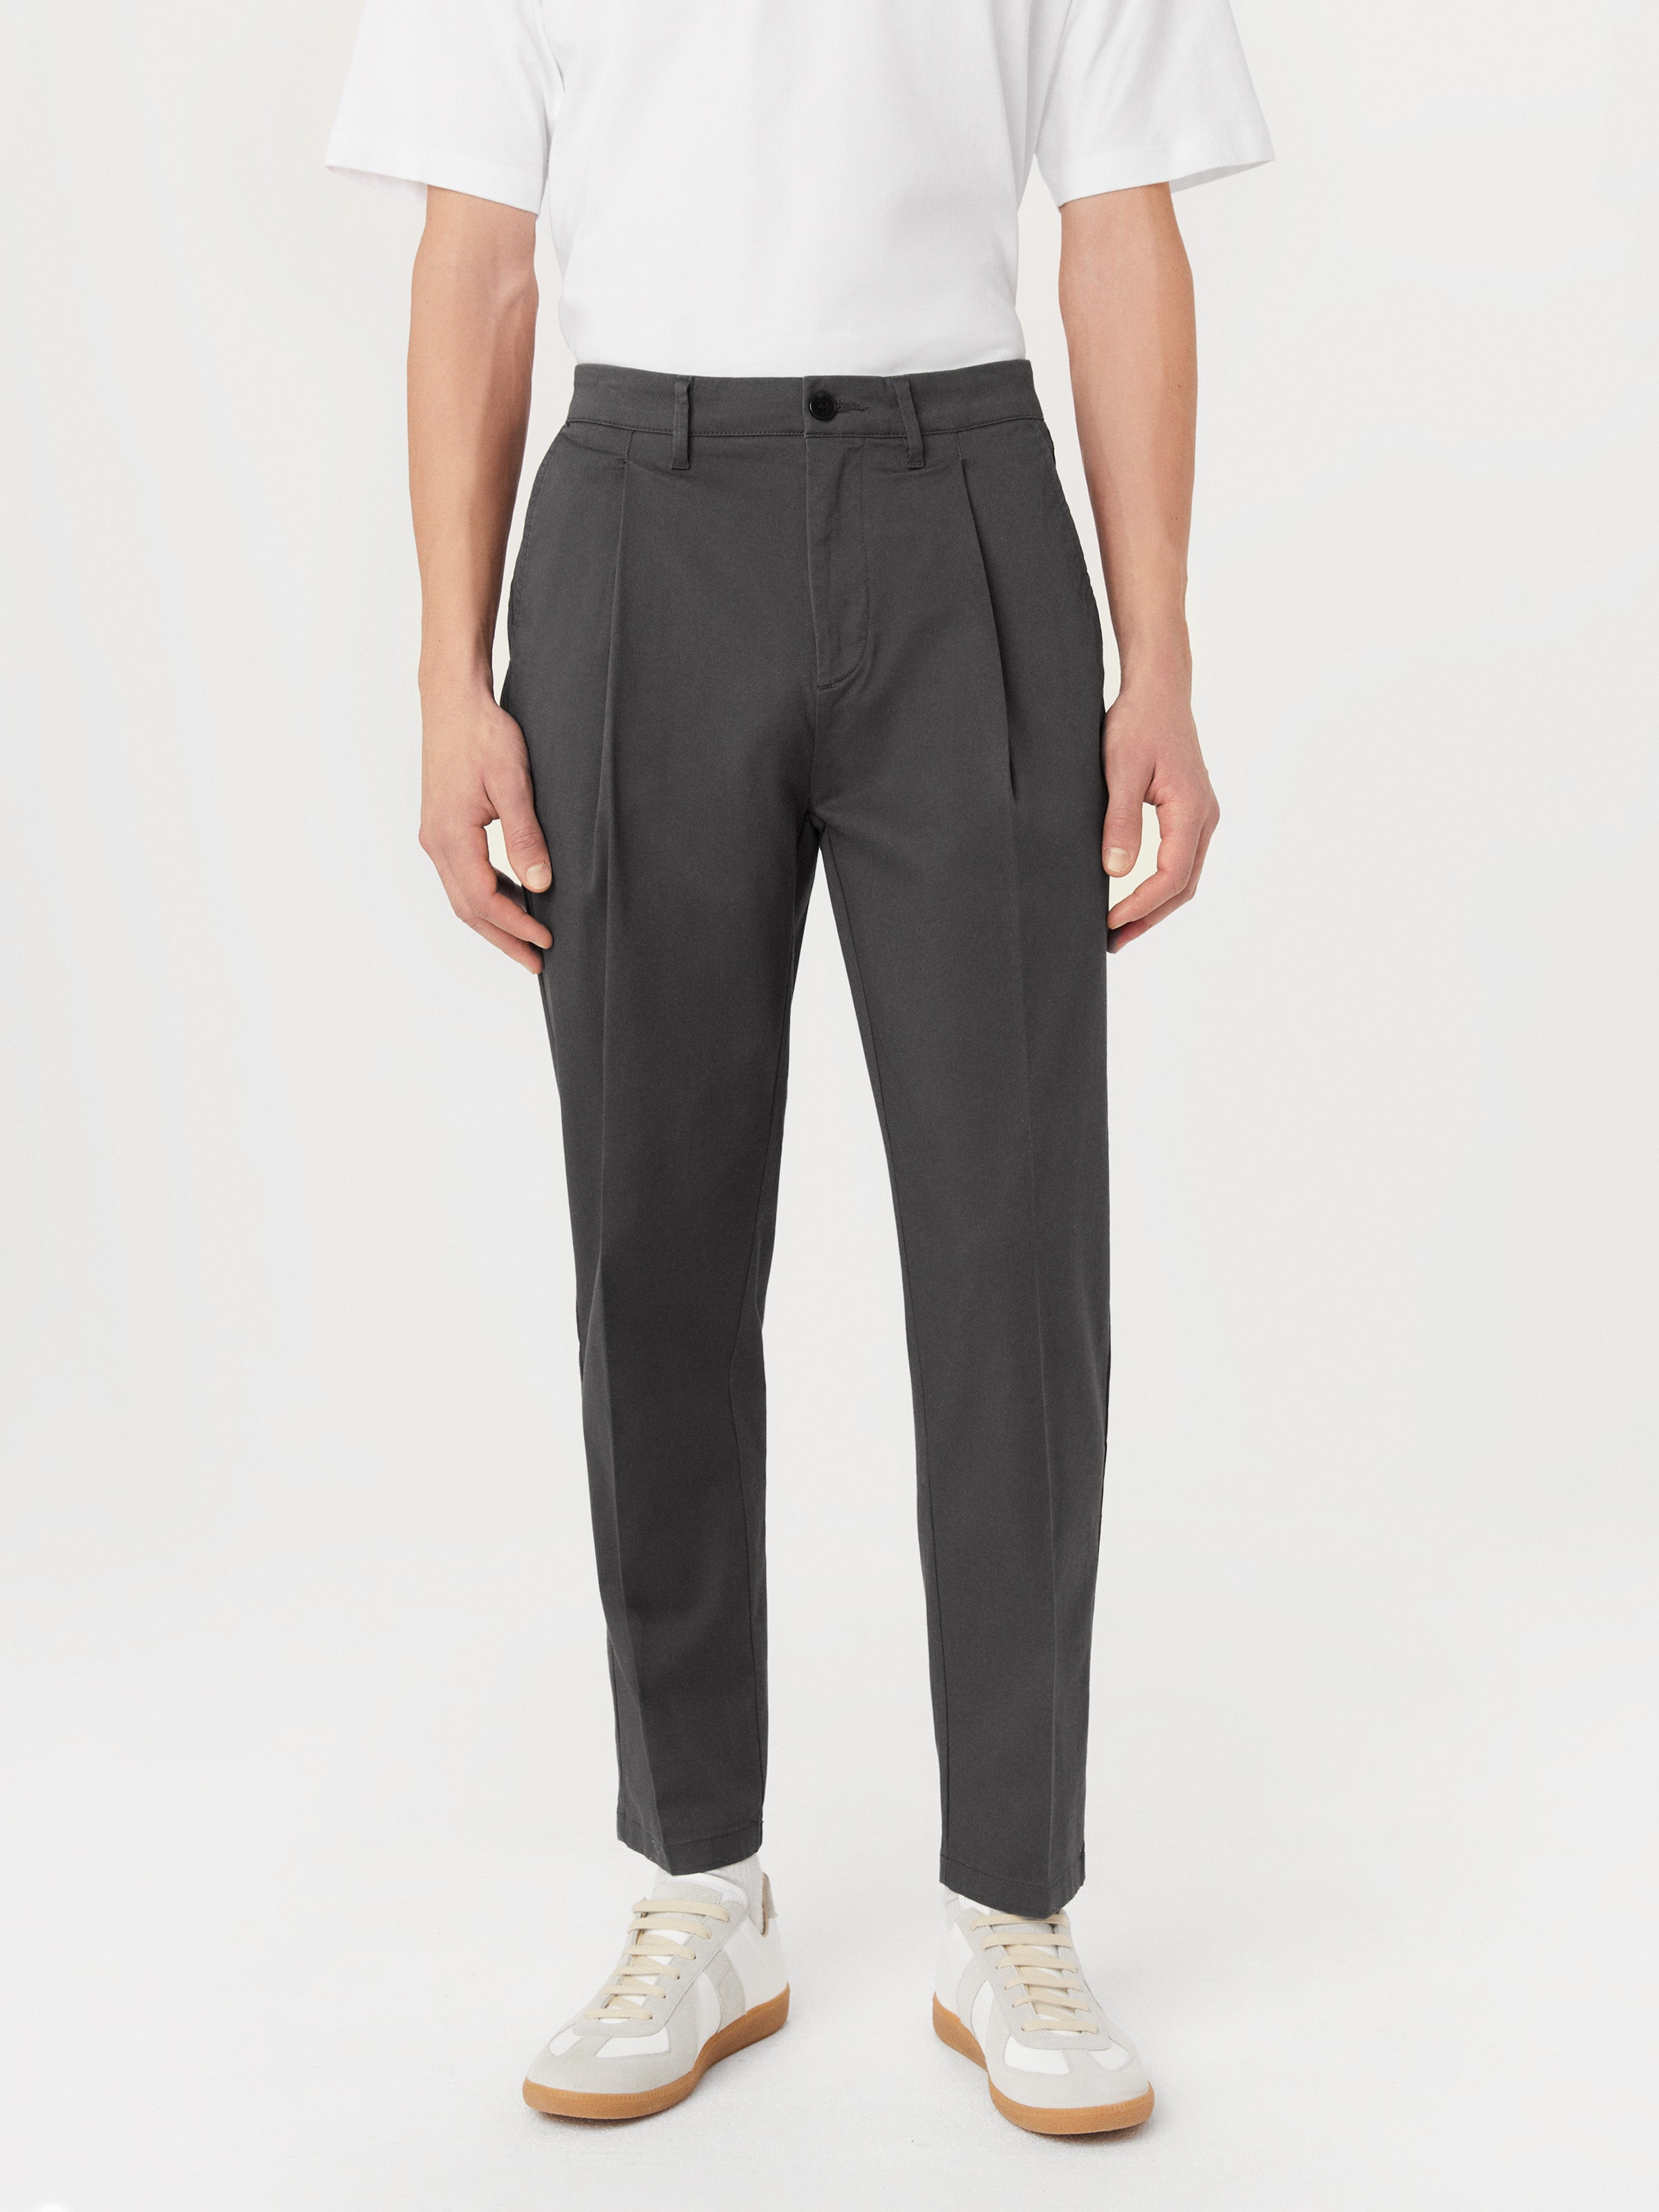 The Jamie Pleated Chino Pant in Iron Grey